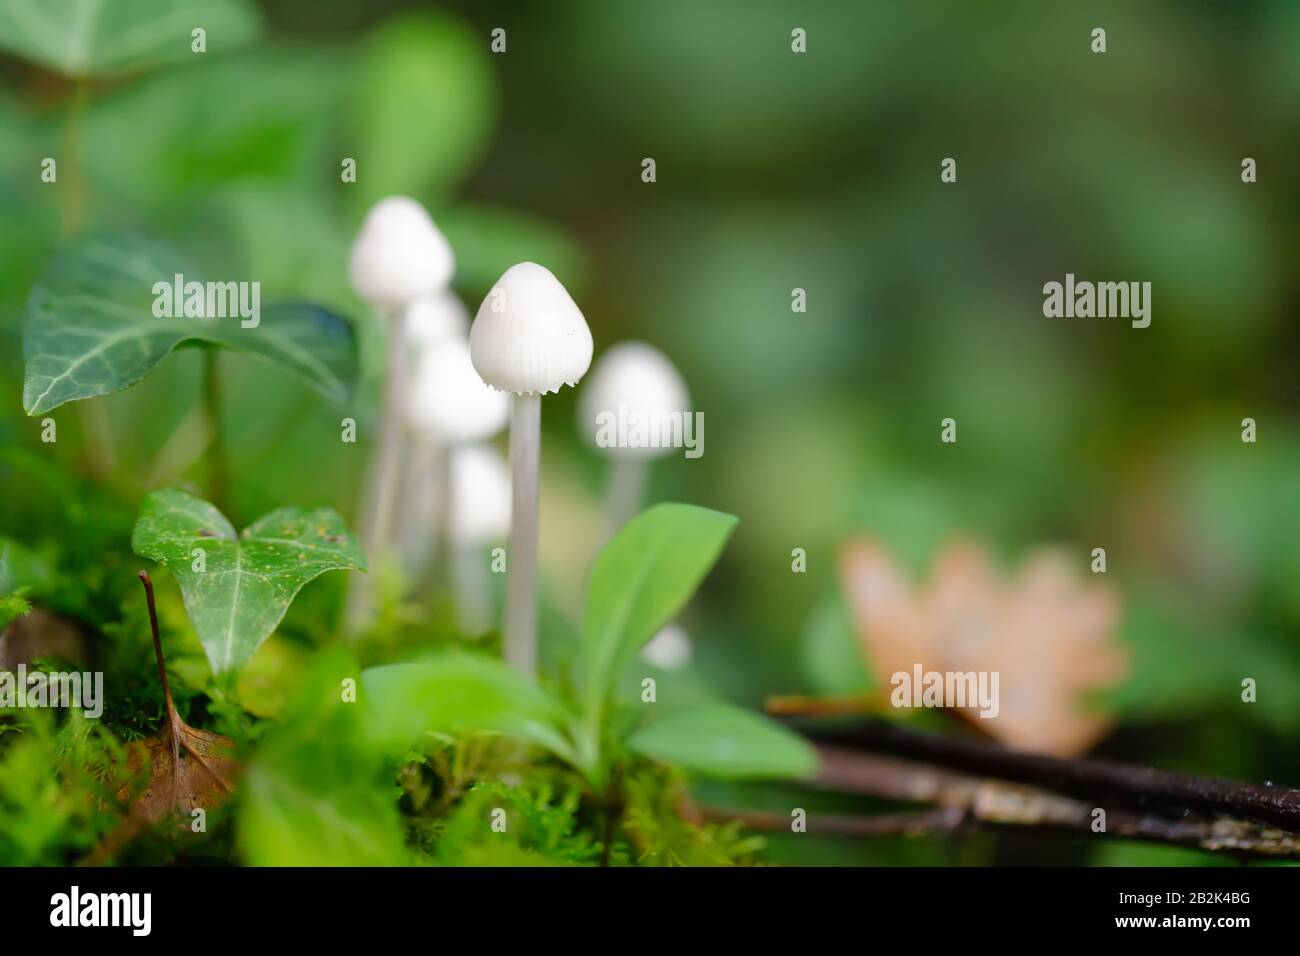 Young bolbitius lacteus mushroom growing in the wet moss of a temperate forest. Stock Photo